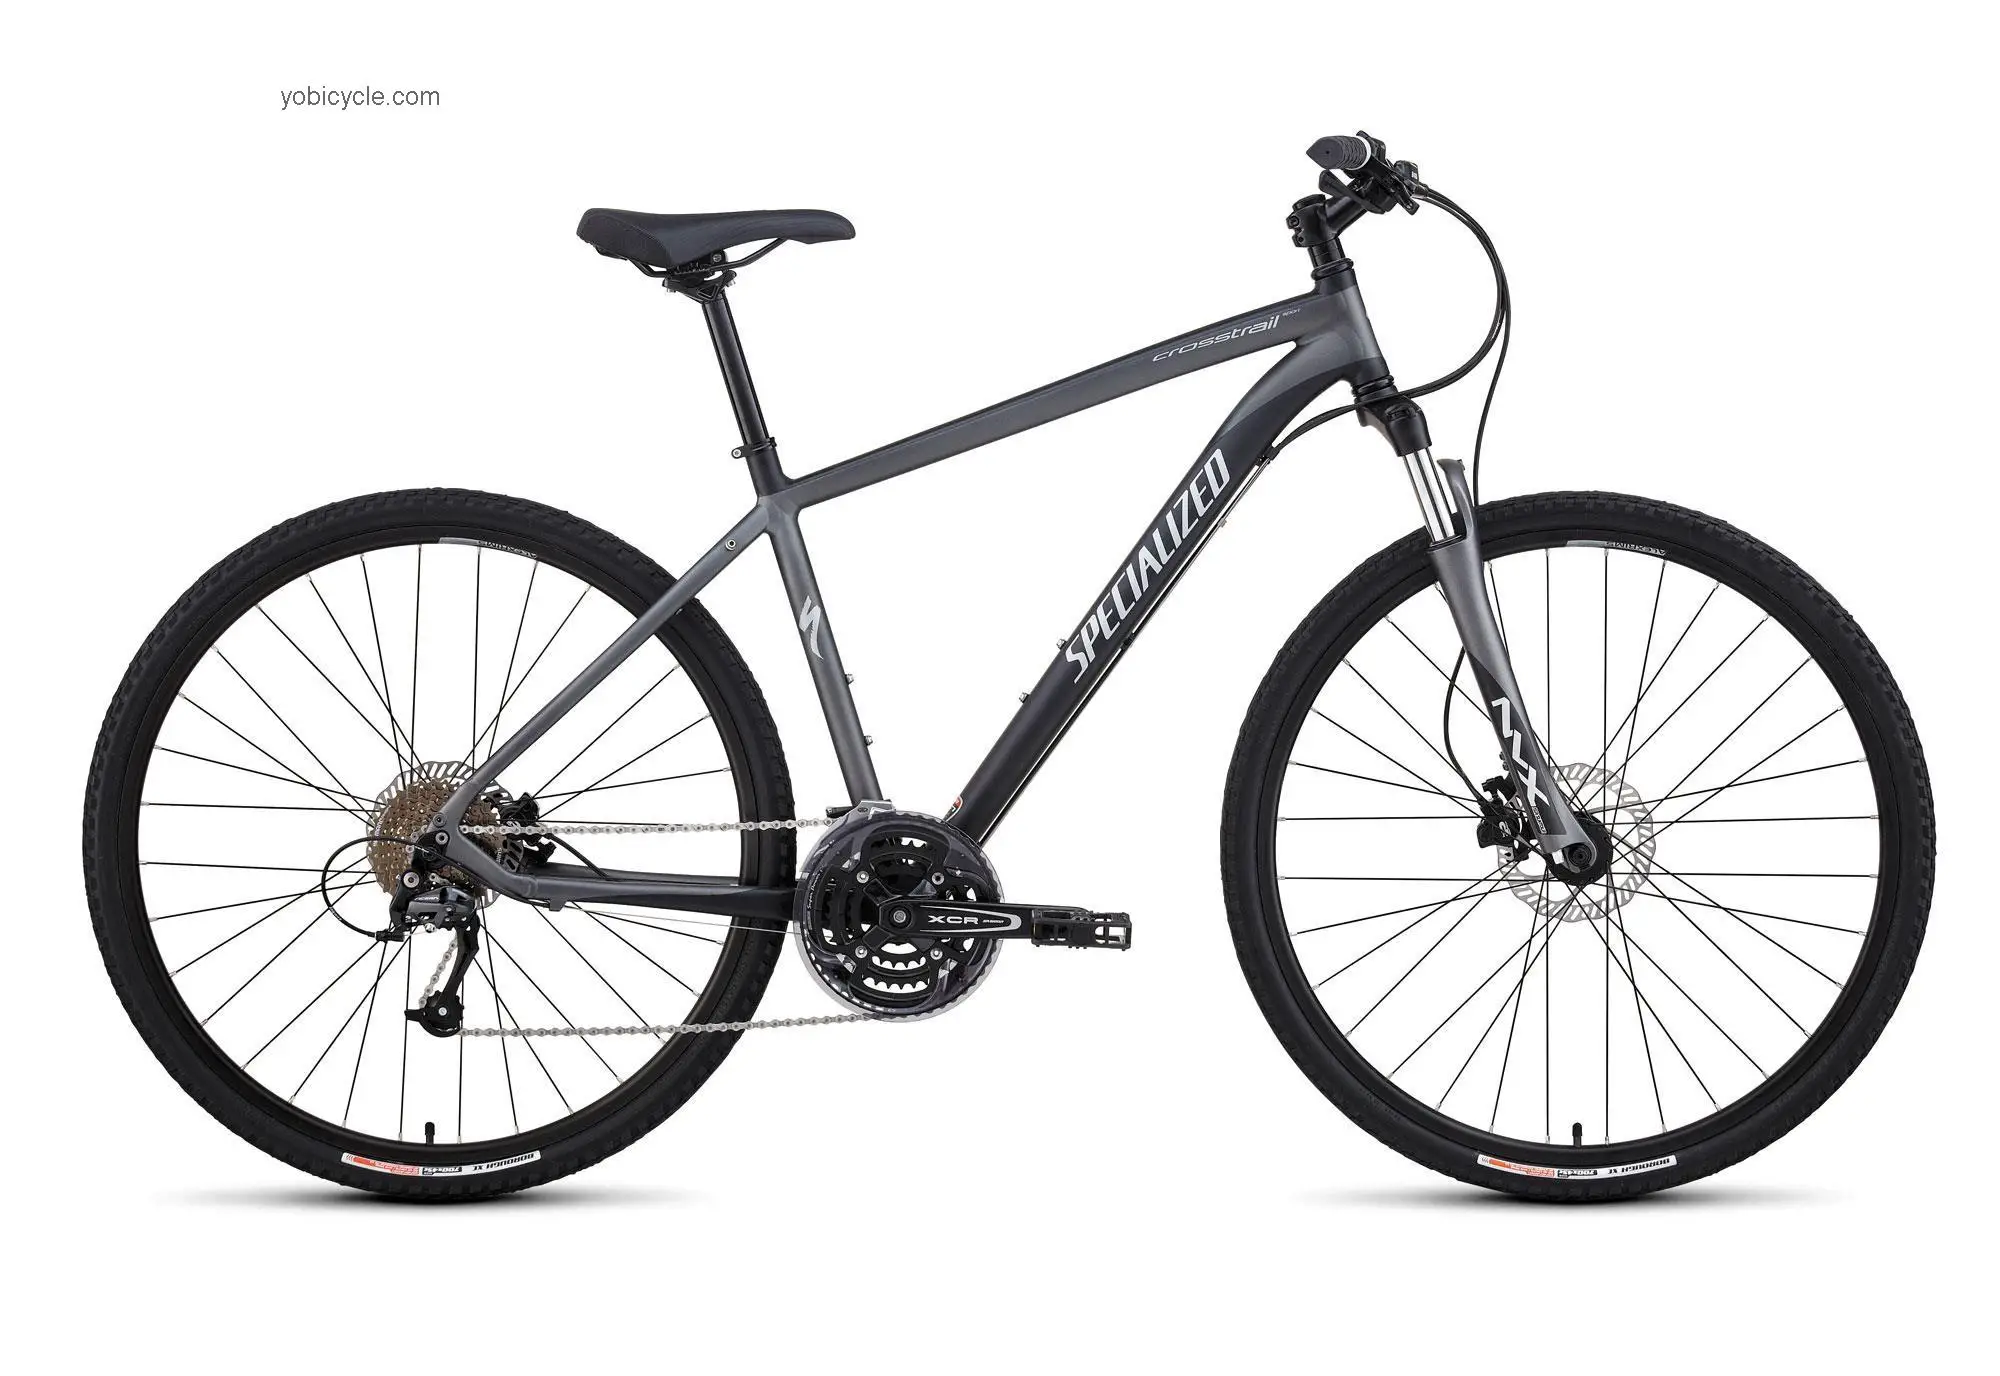 Specialized Crosstrail Sprt Disc 2012 comparison online with competitors